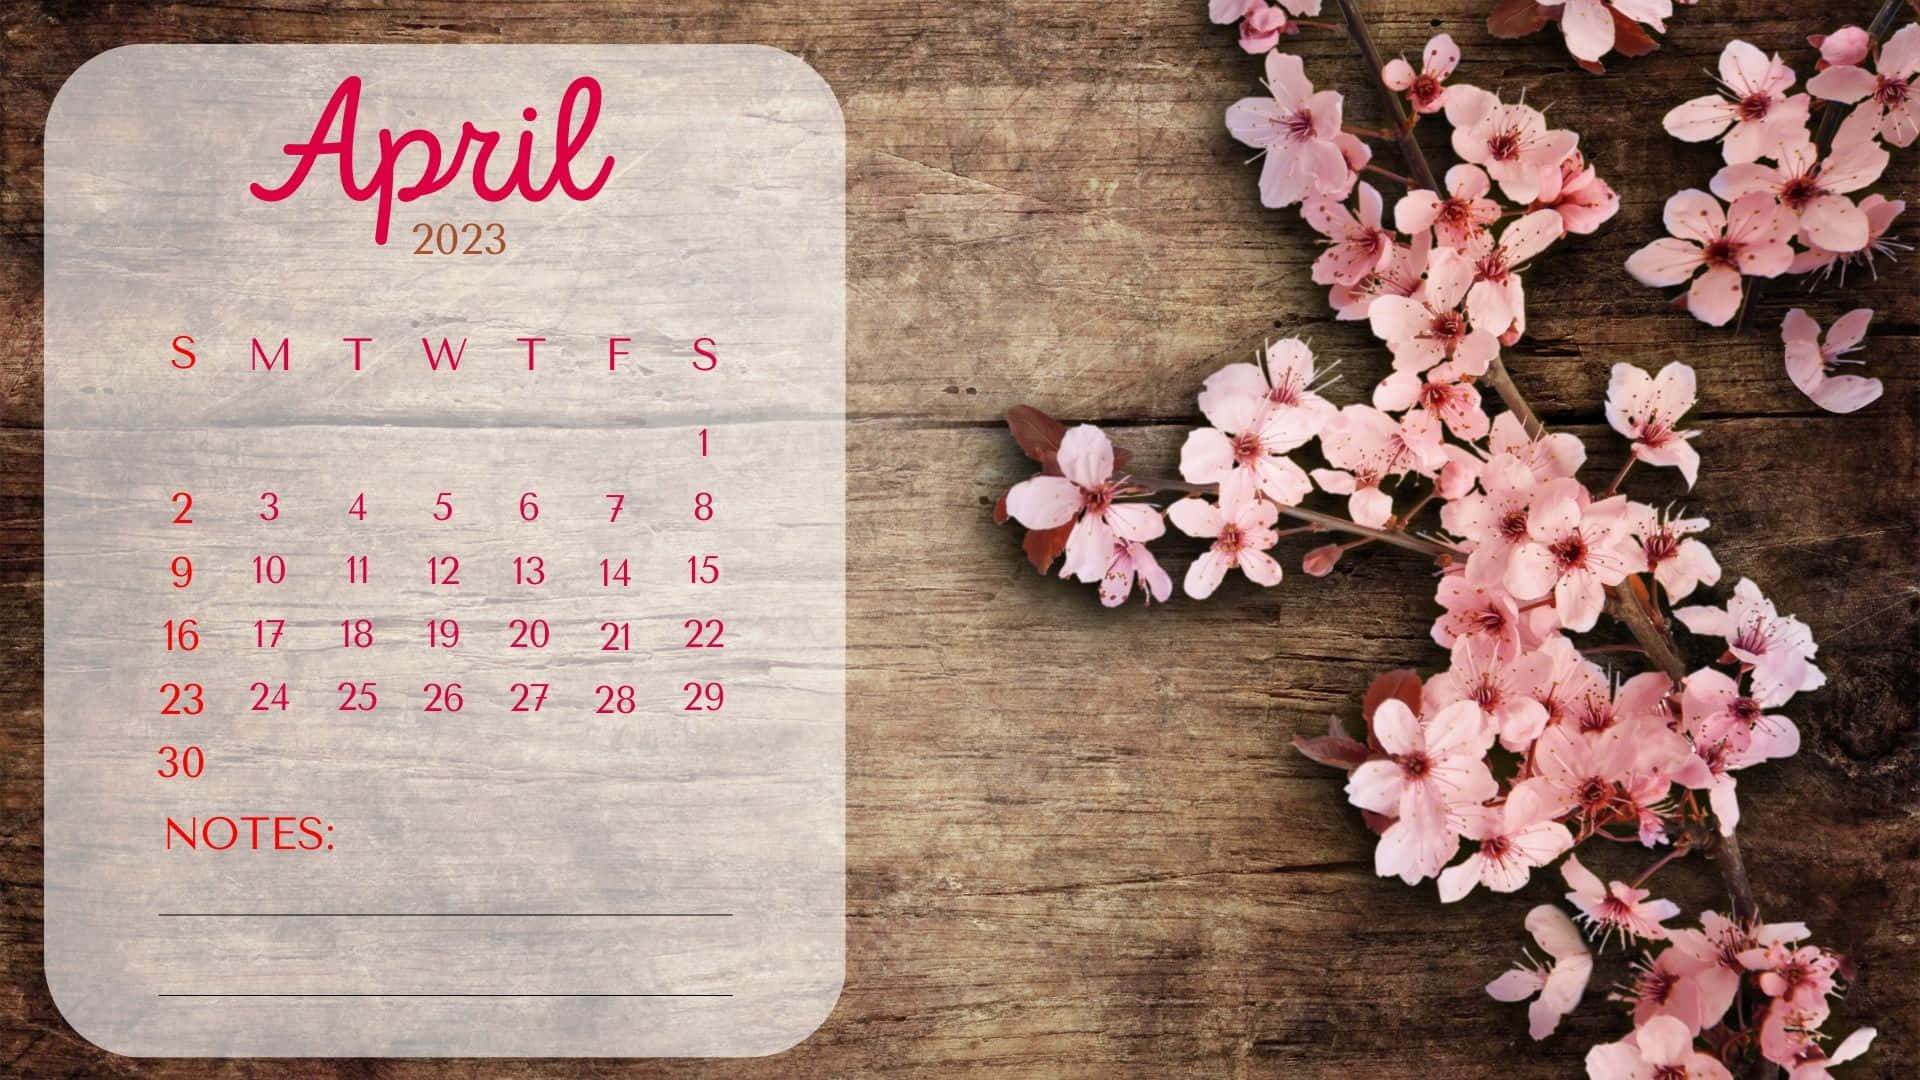 April 2019 Calendar With Pink Flowers On A Wooden Background Wallpaper